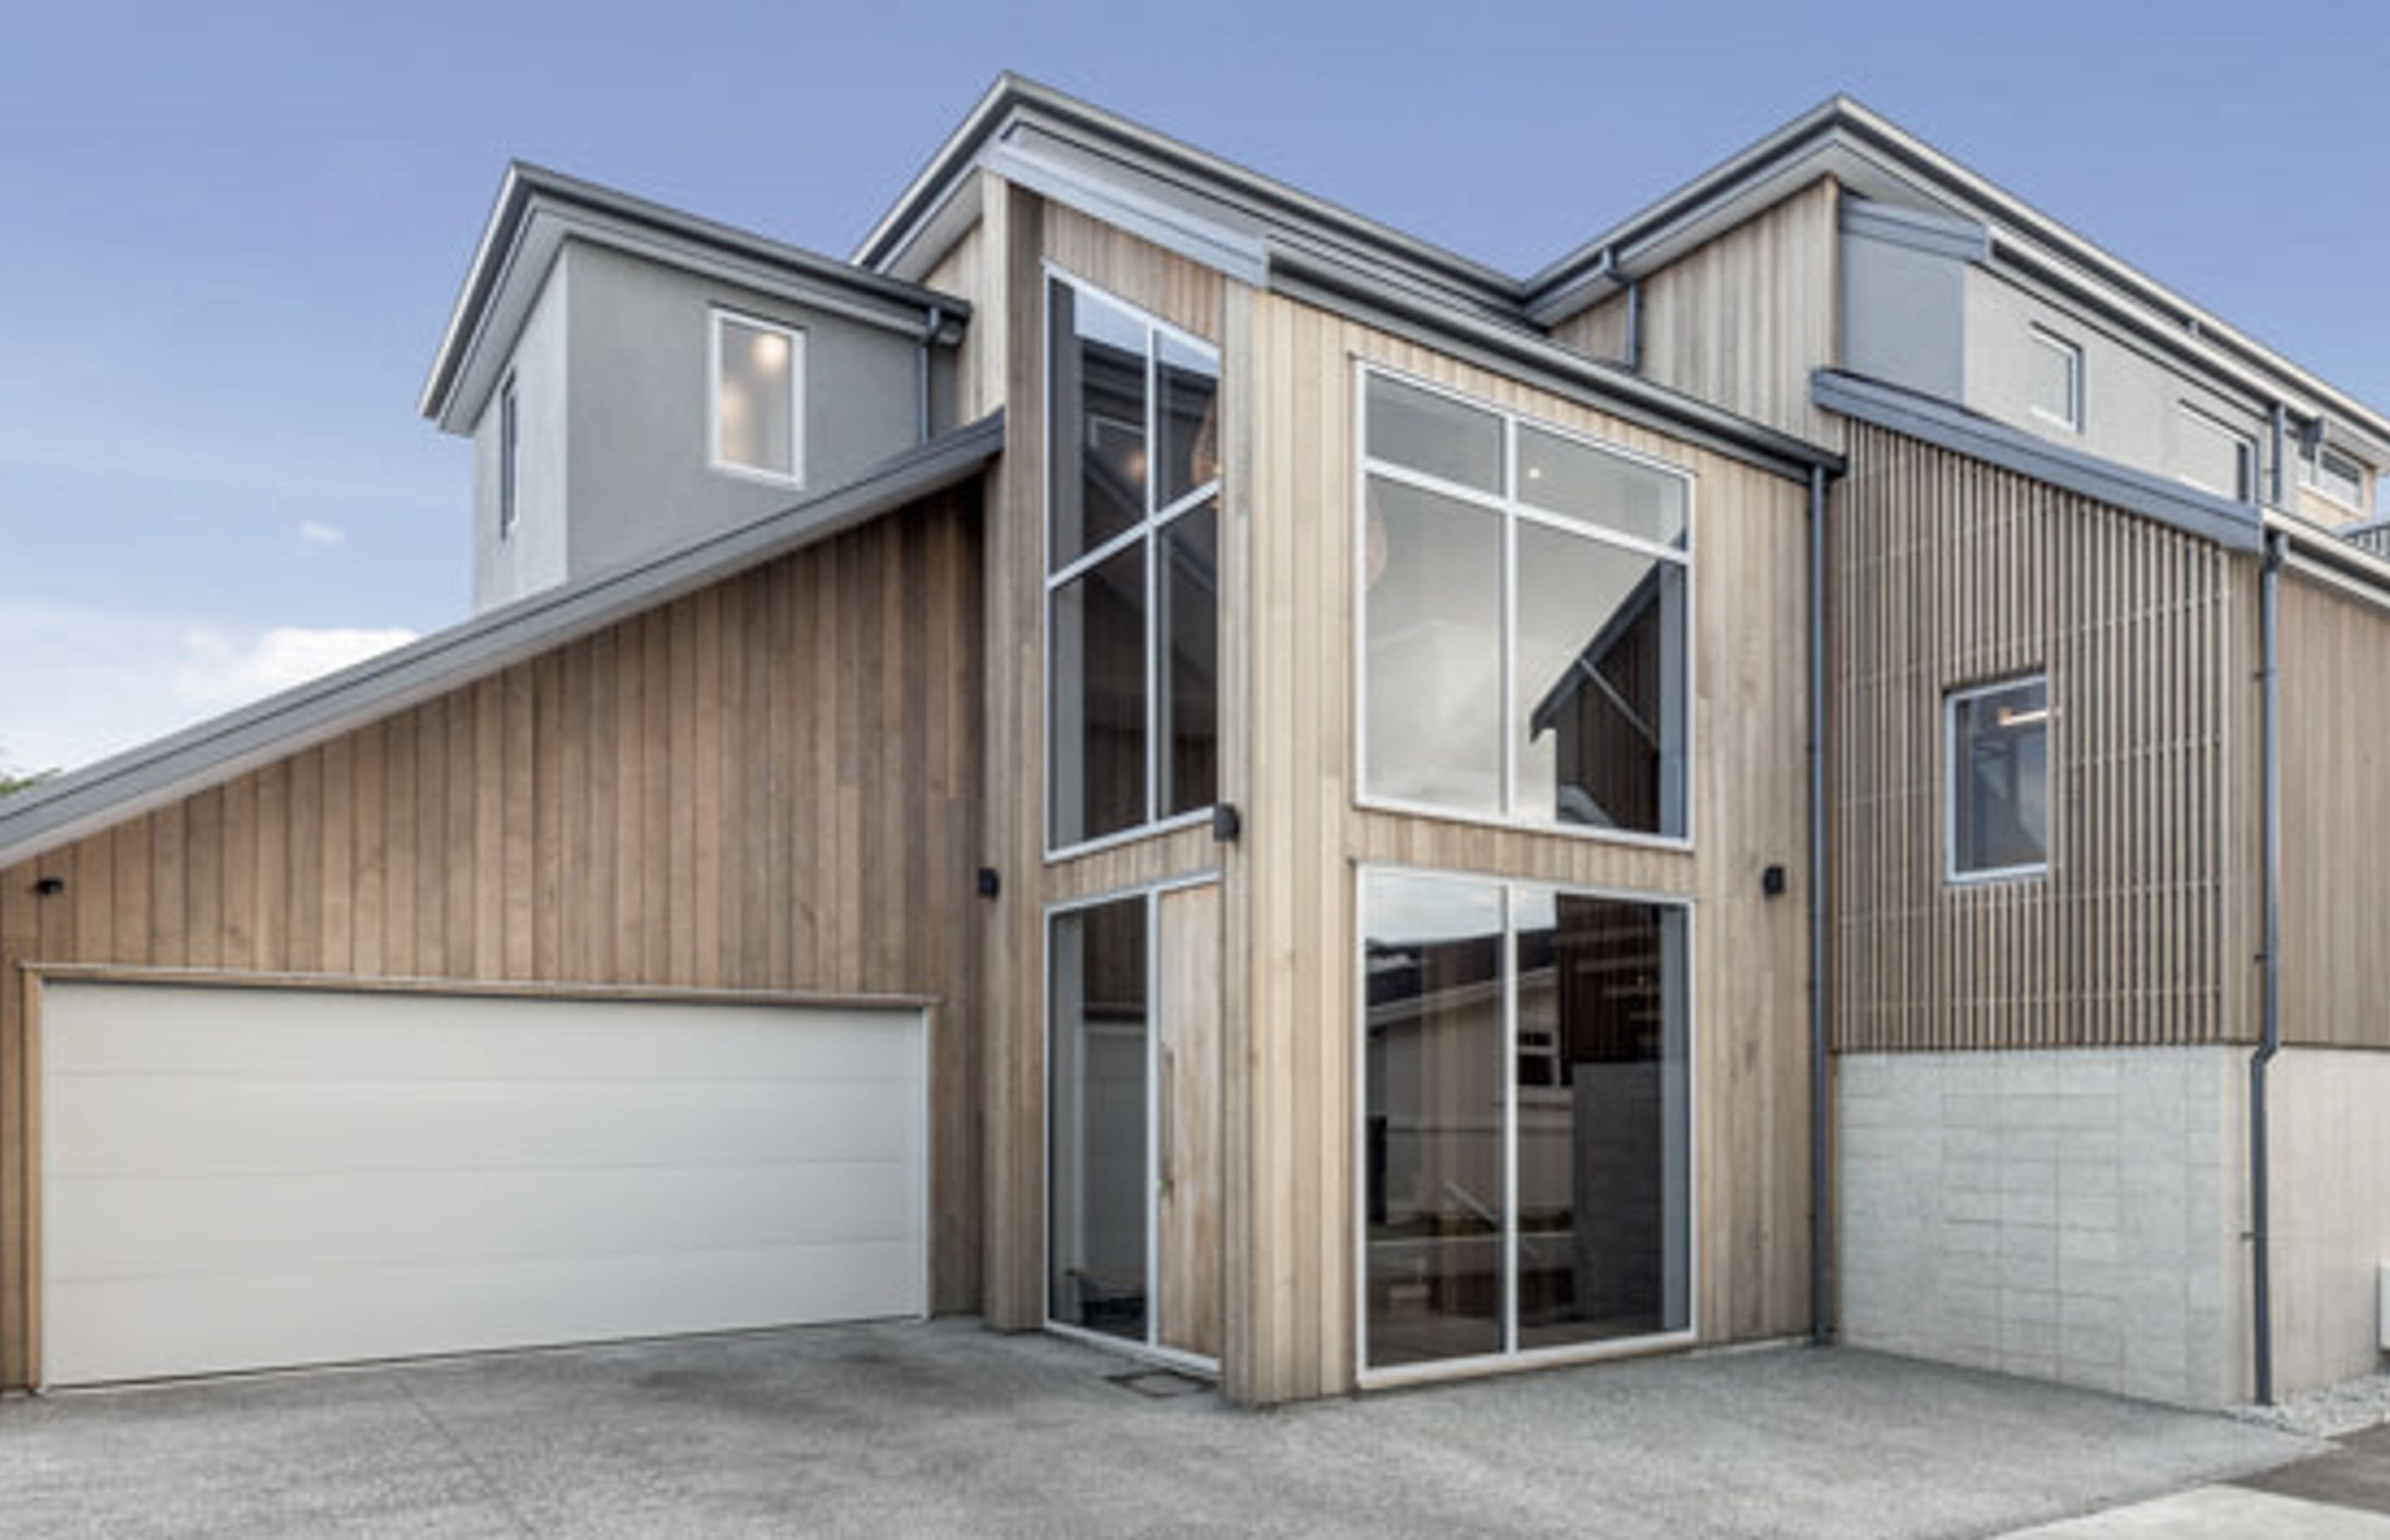 Clad in Cedar timber this Mount Maunganui home sits well in the coastal environment with wonderful water views as the backdrop.